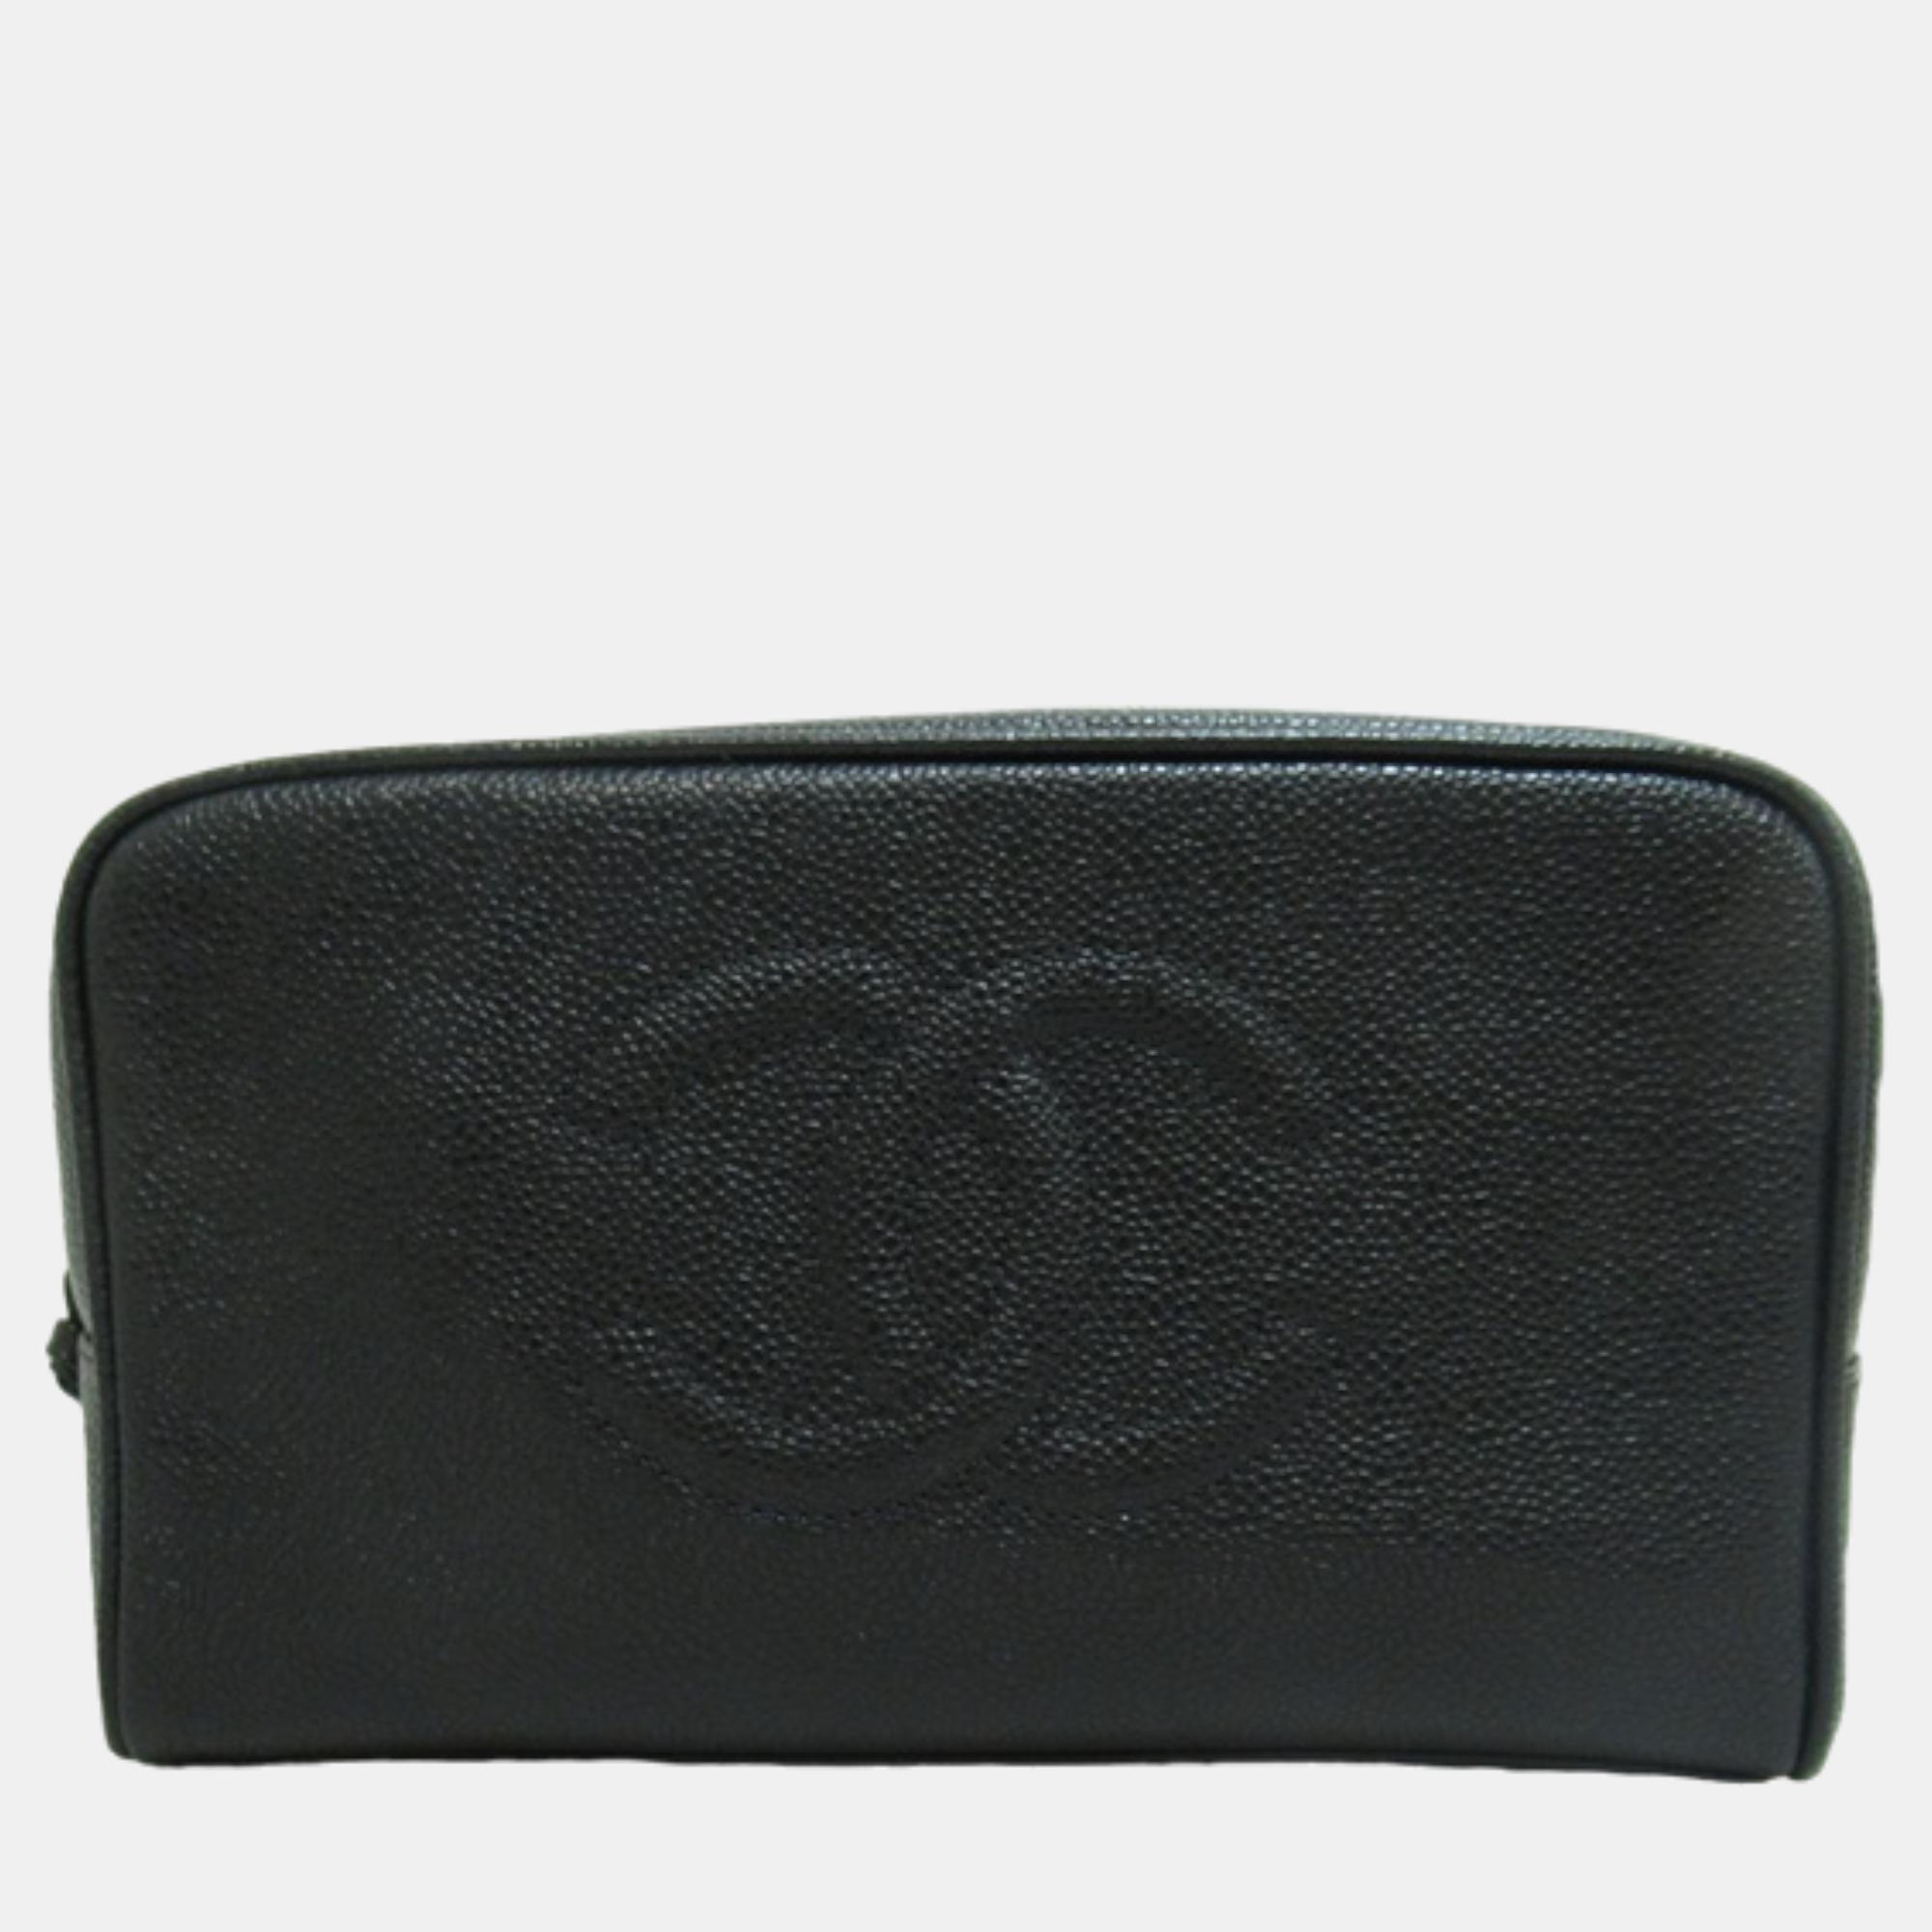 Pre-owned Chanel Black Leather Cc Caviar Clutch Vanity Bag